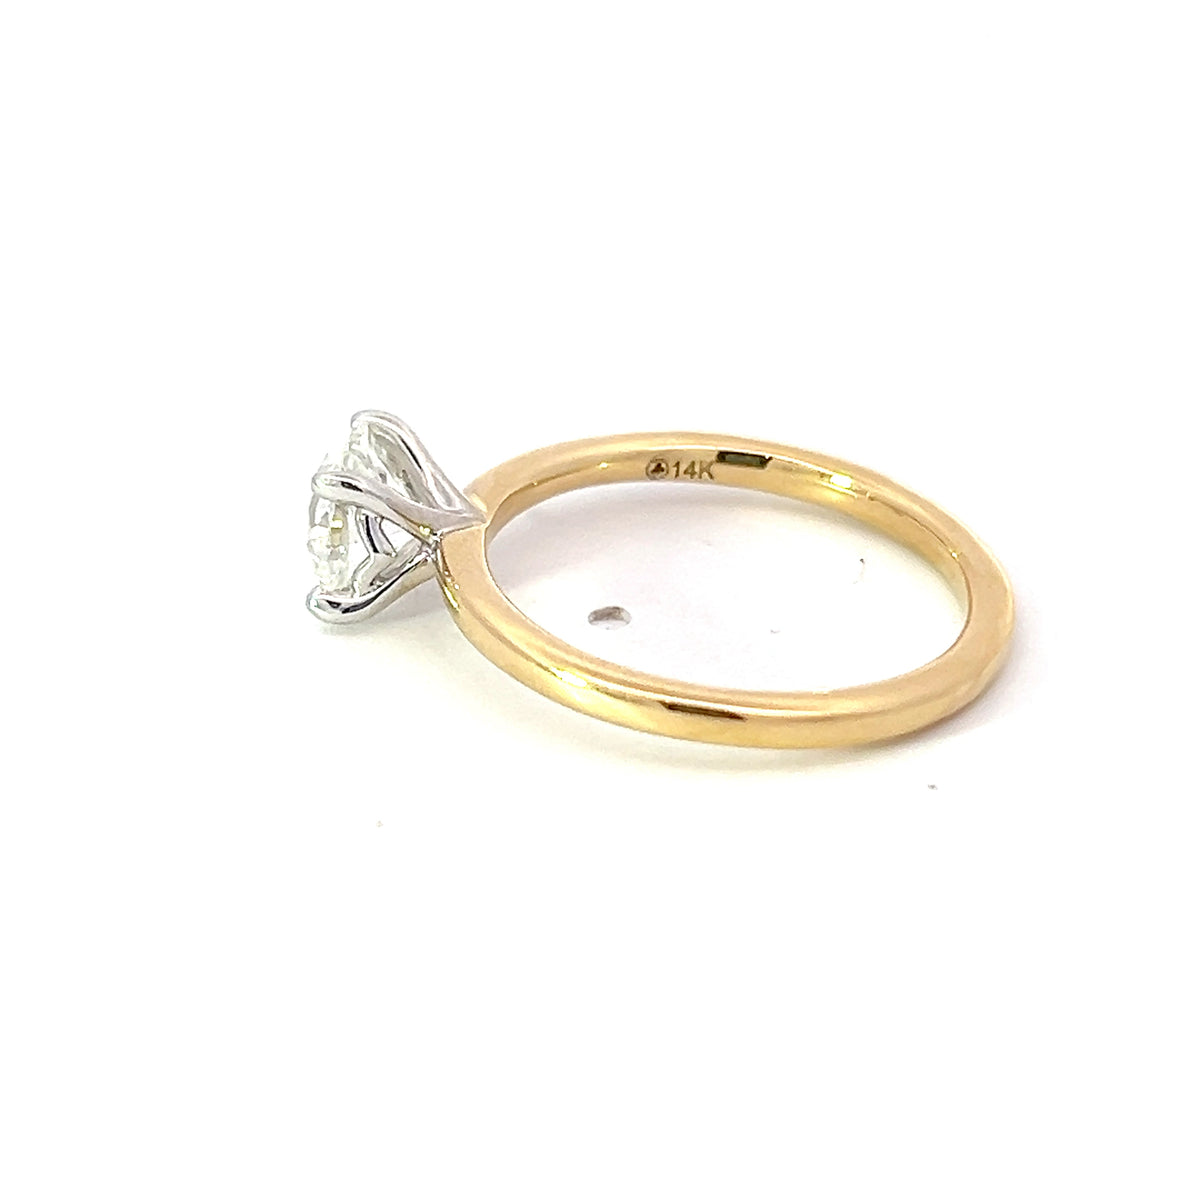 14K Yellow Gold 1.01cttw Round Brilliant Cut Canadian Diamond Engagement Ring